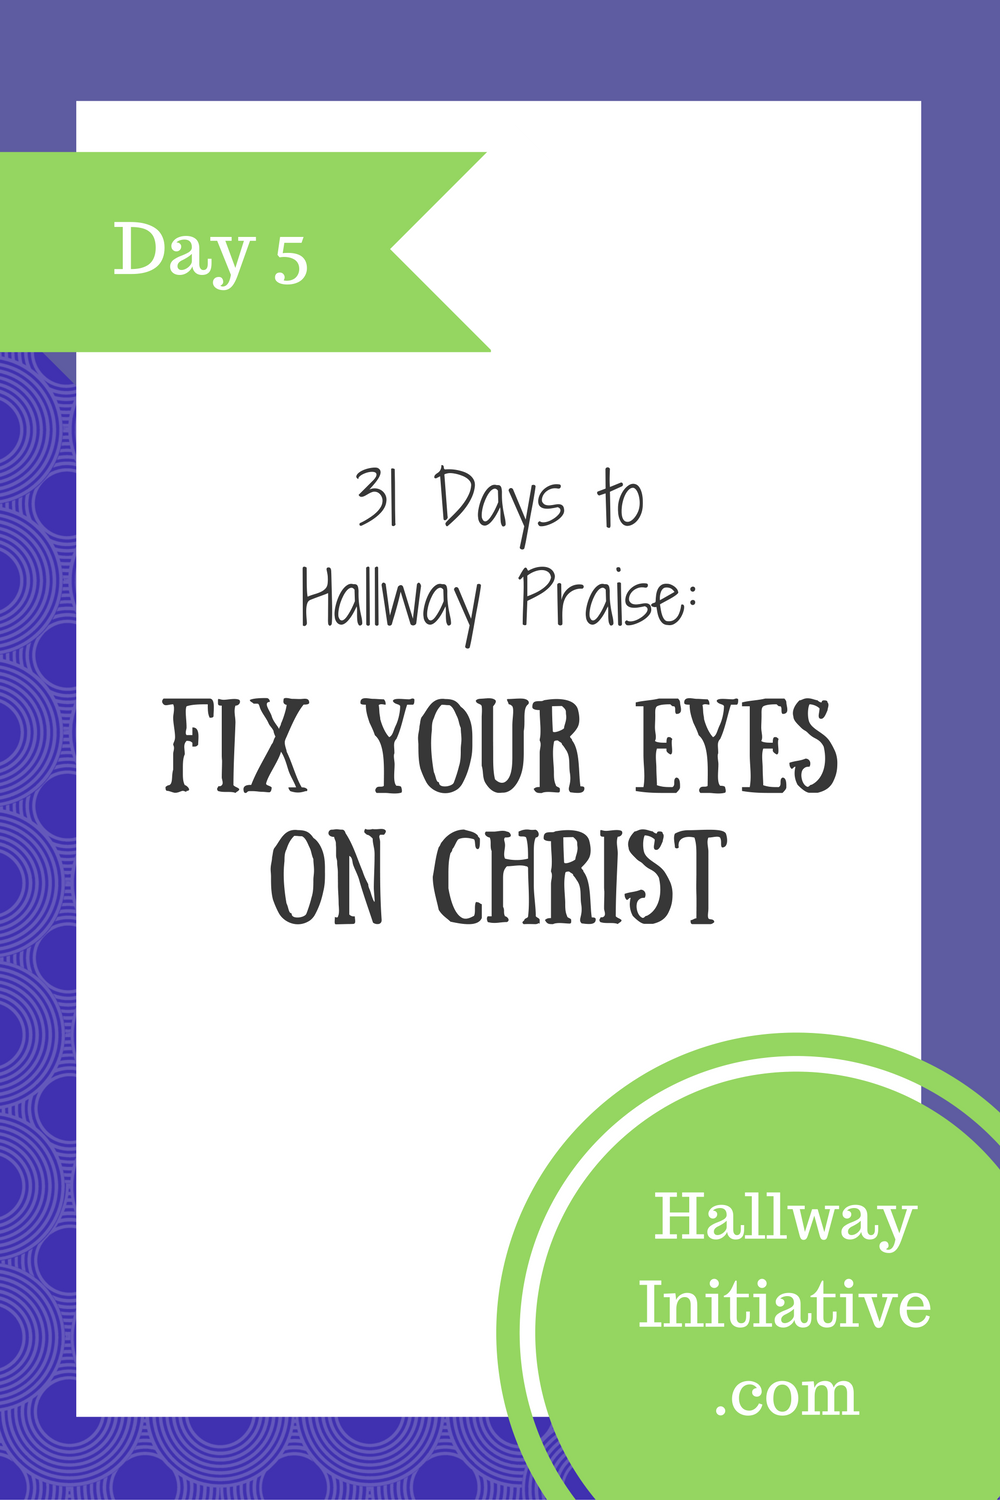 Day 5: fix your eyes on Christ